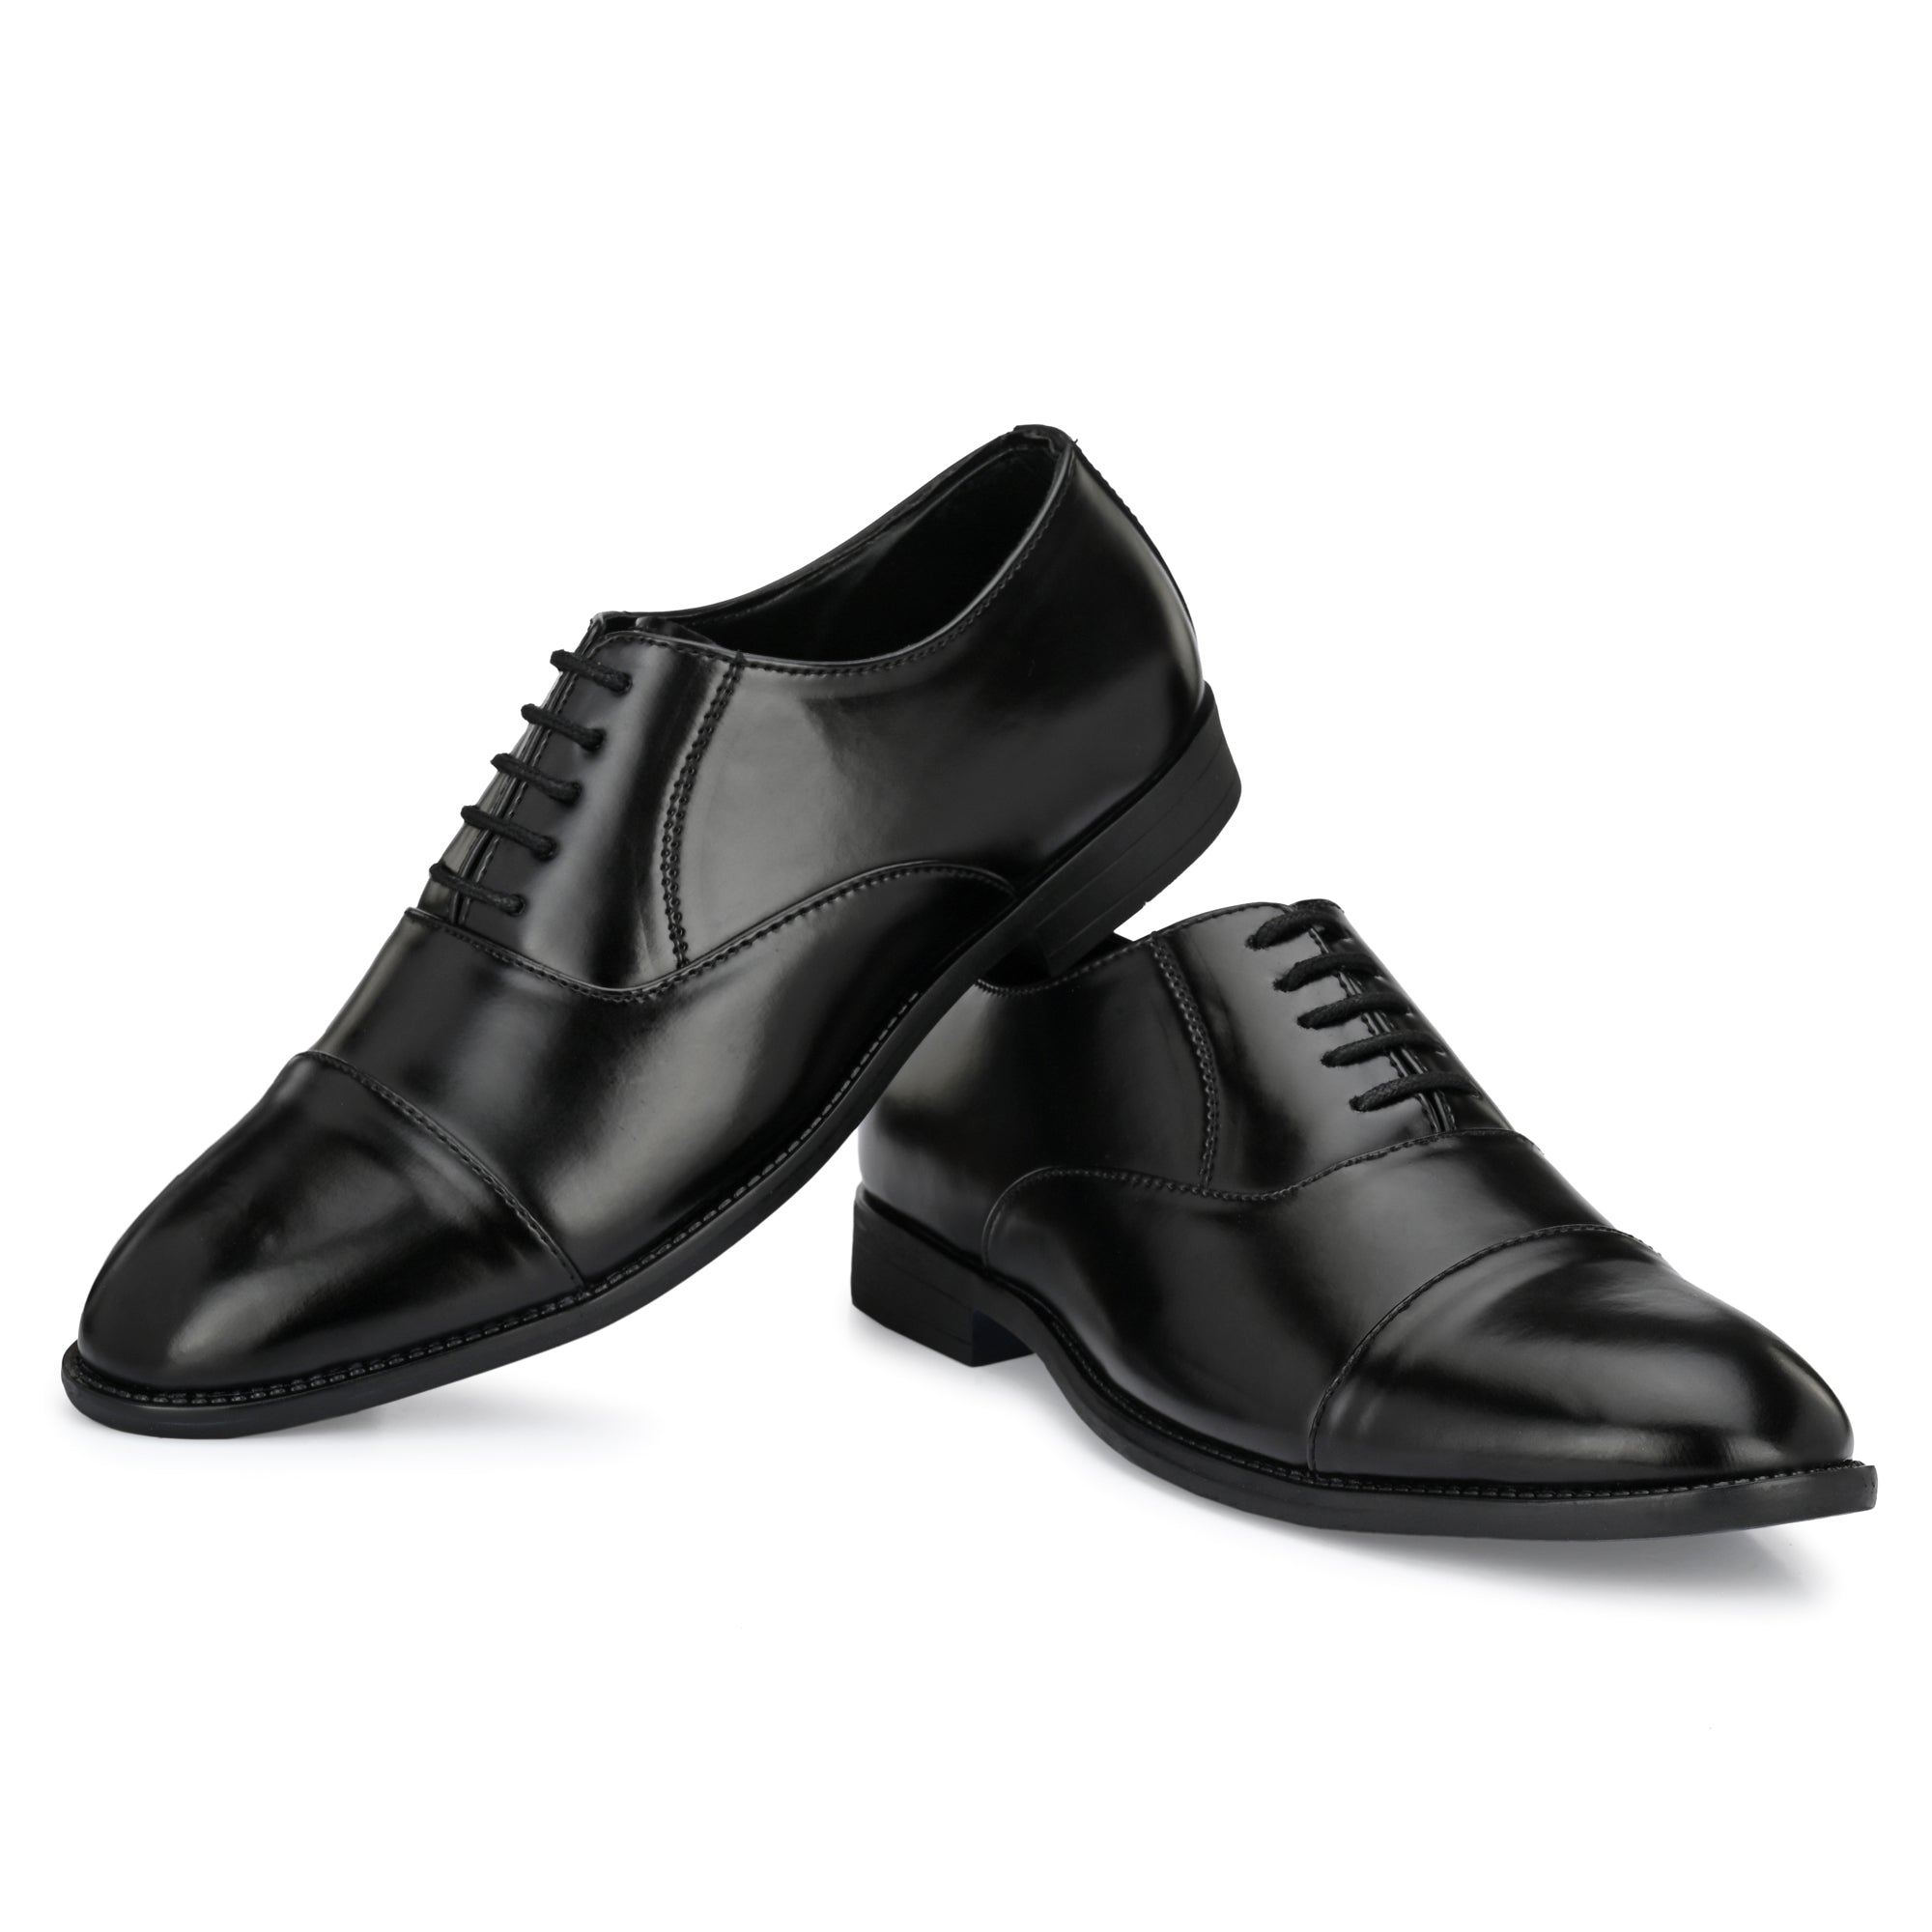 Attitudist Handcrafted Oxford Black Plain Formal Laceup Derby Shoes With Cap Toe For Men MTOBSF